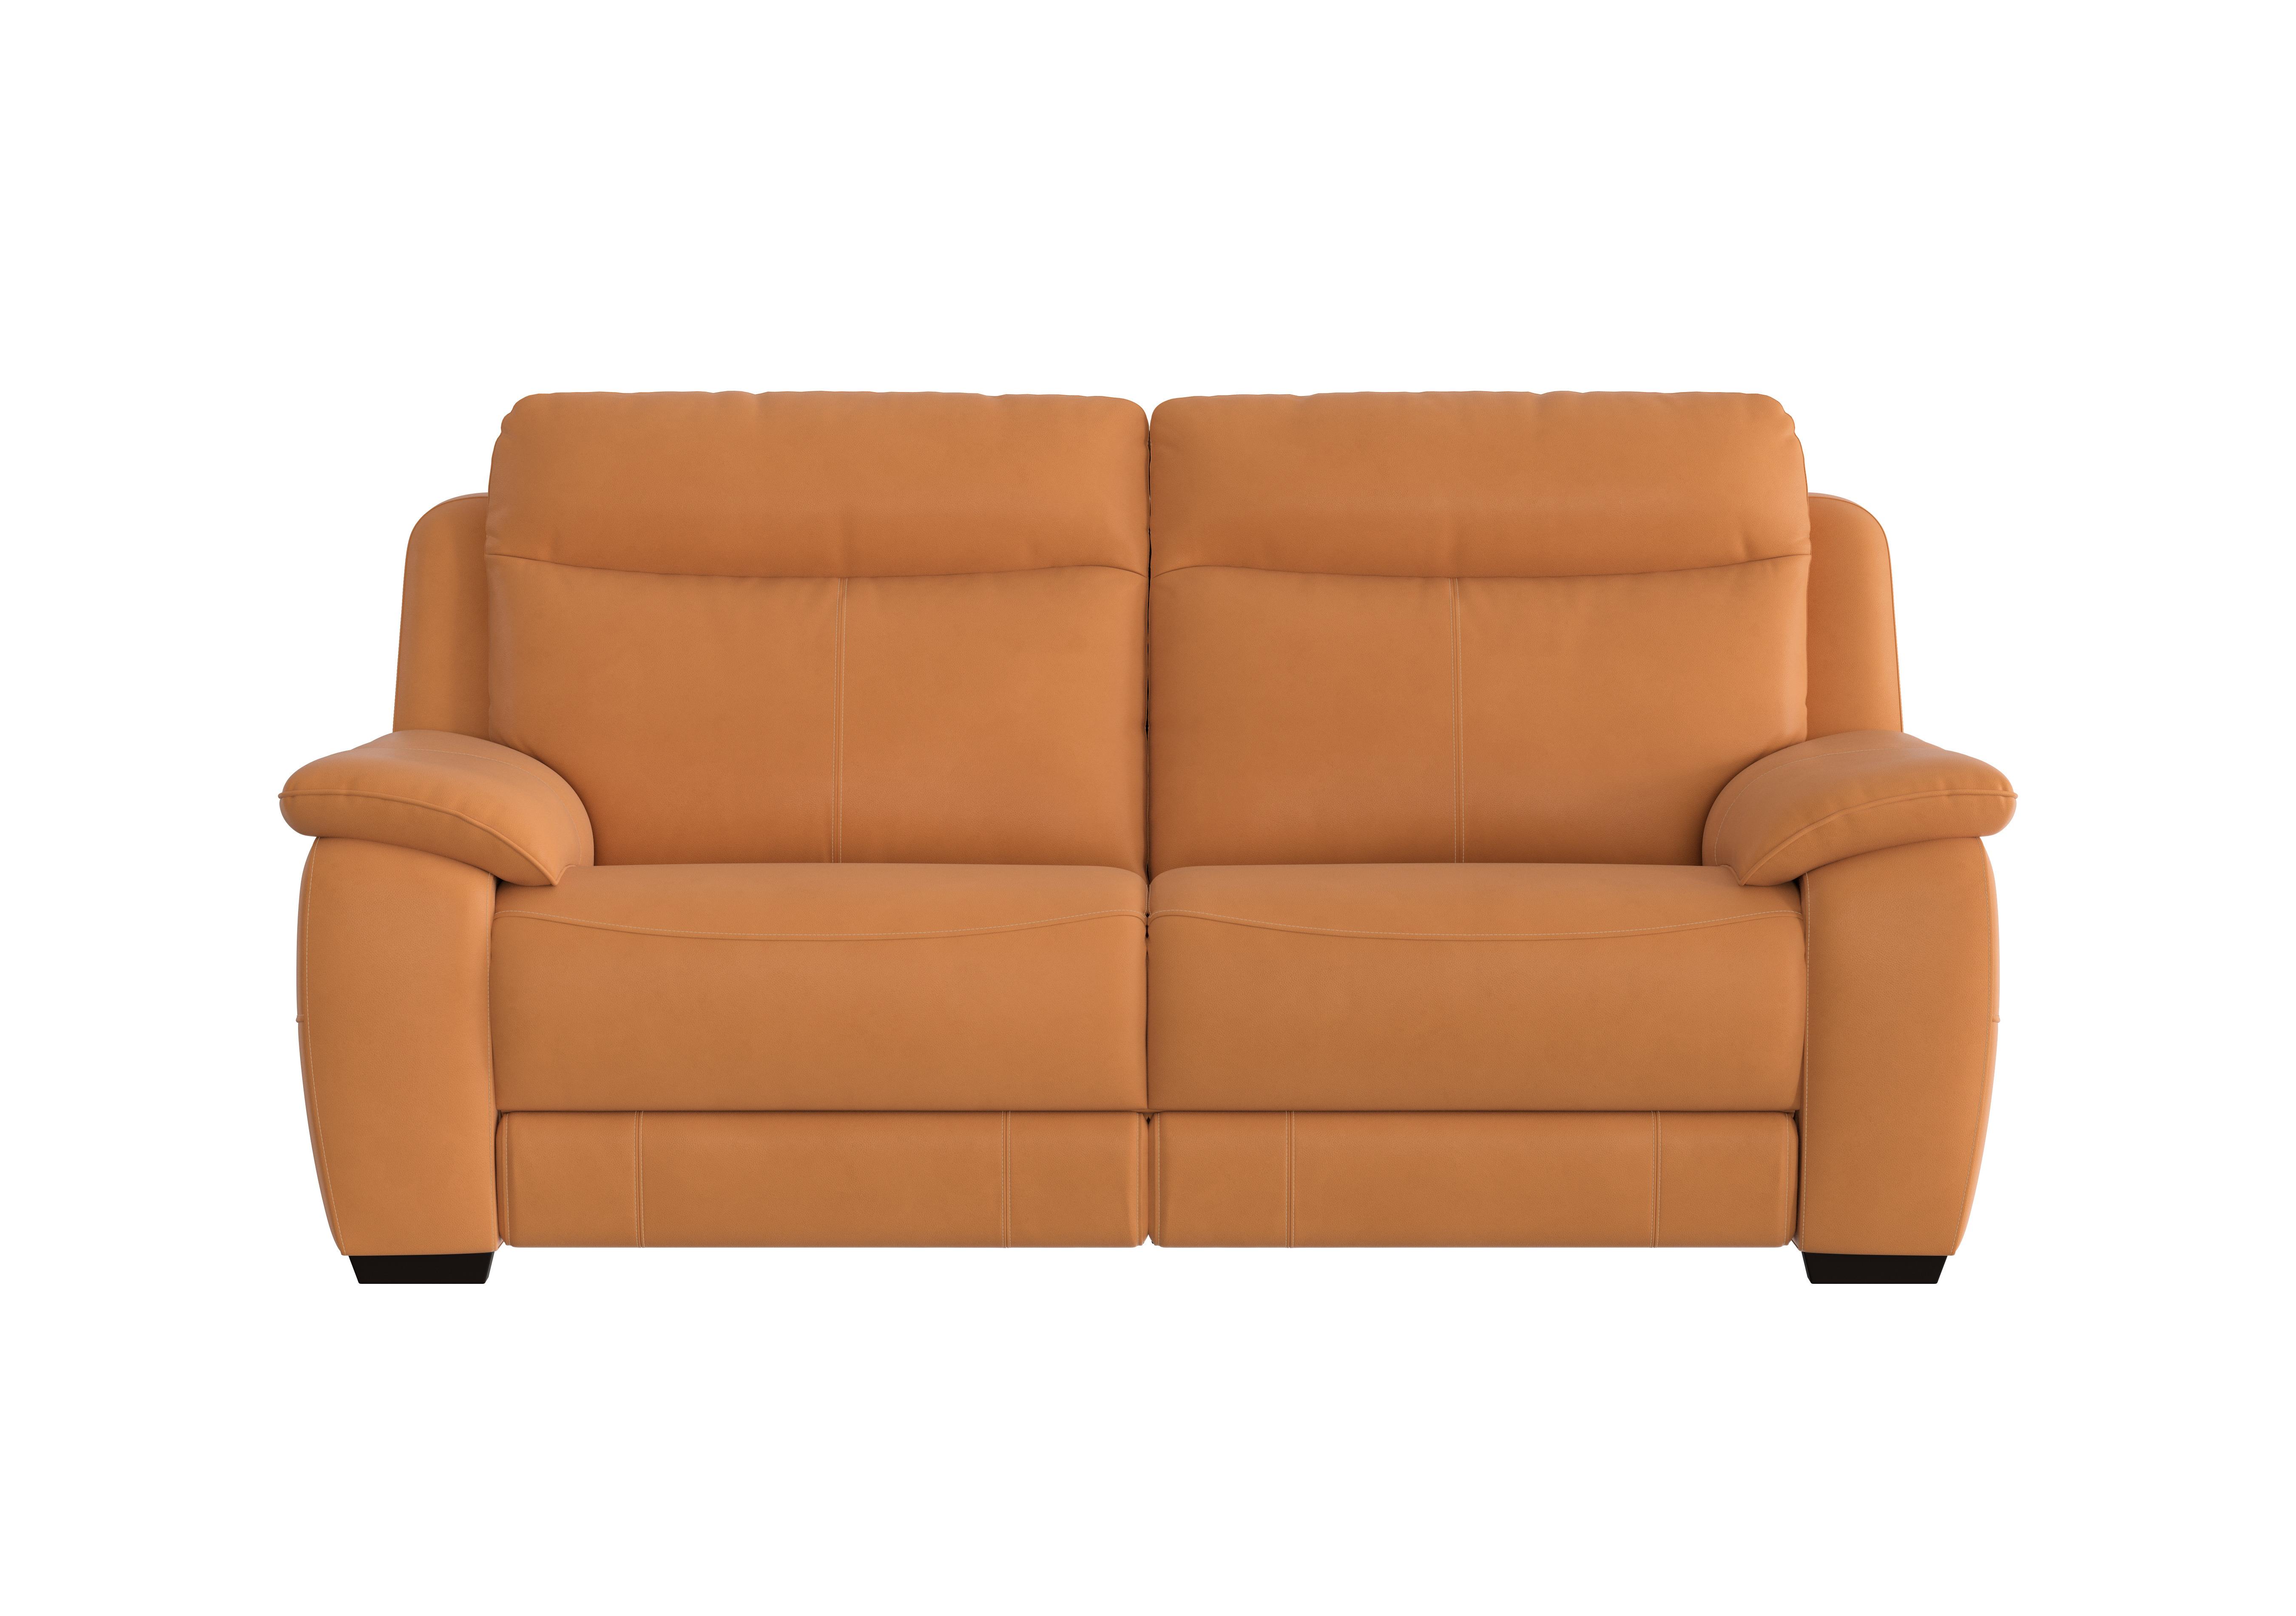 Starlight Express 3 Seater Leather Sofa in Bv-335e Honey Yellow on Furniture Village